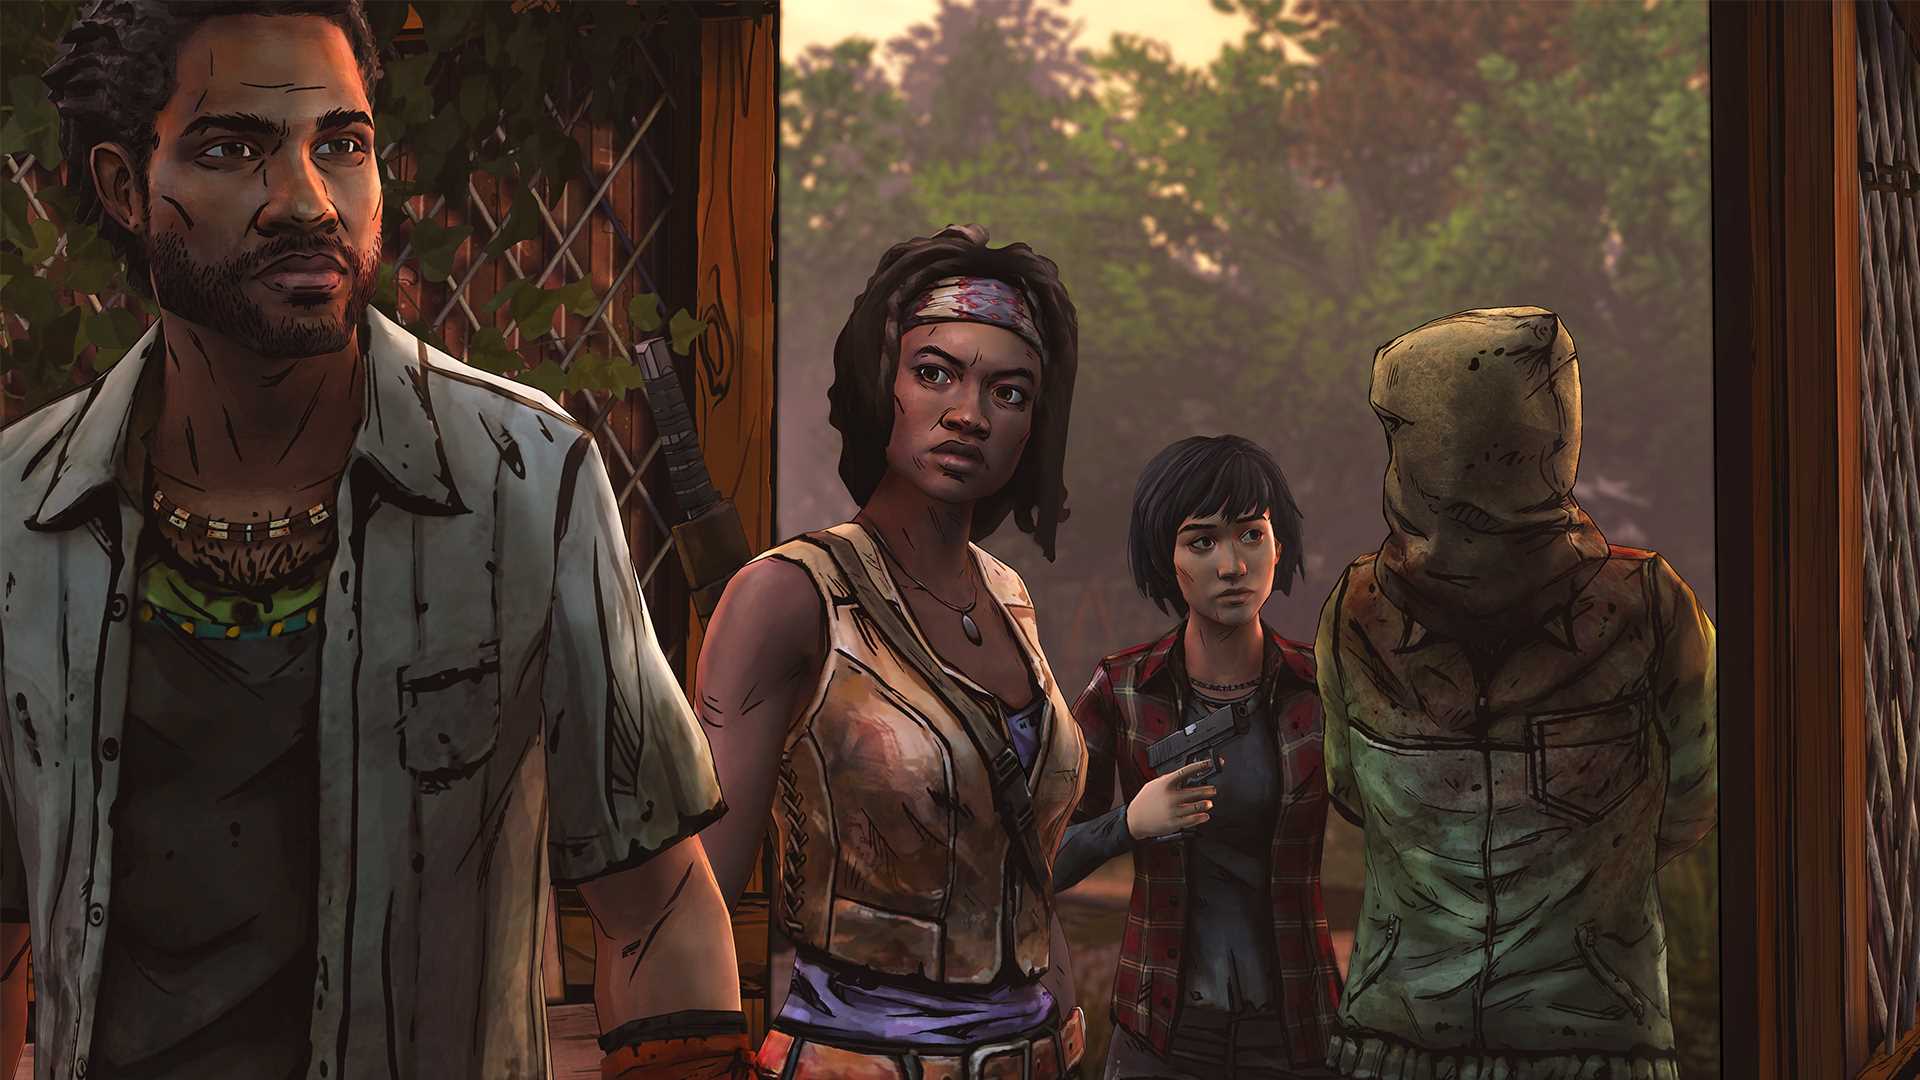 The Walking Dead: Michonne - Episode Three: What We Deserve Review